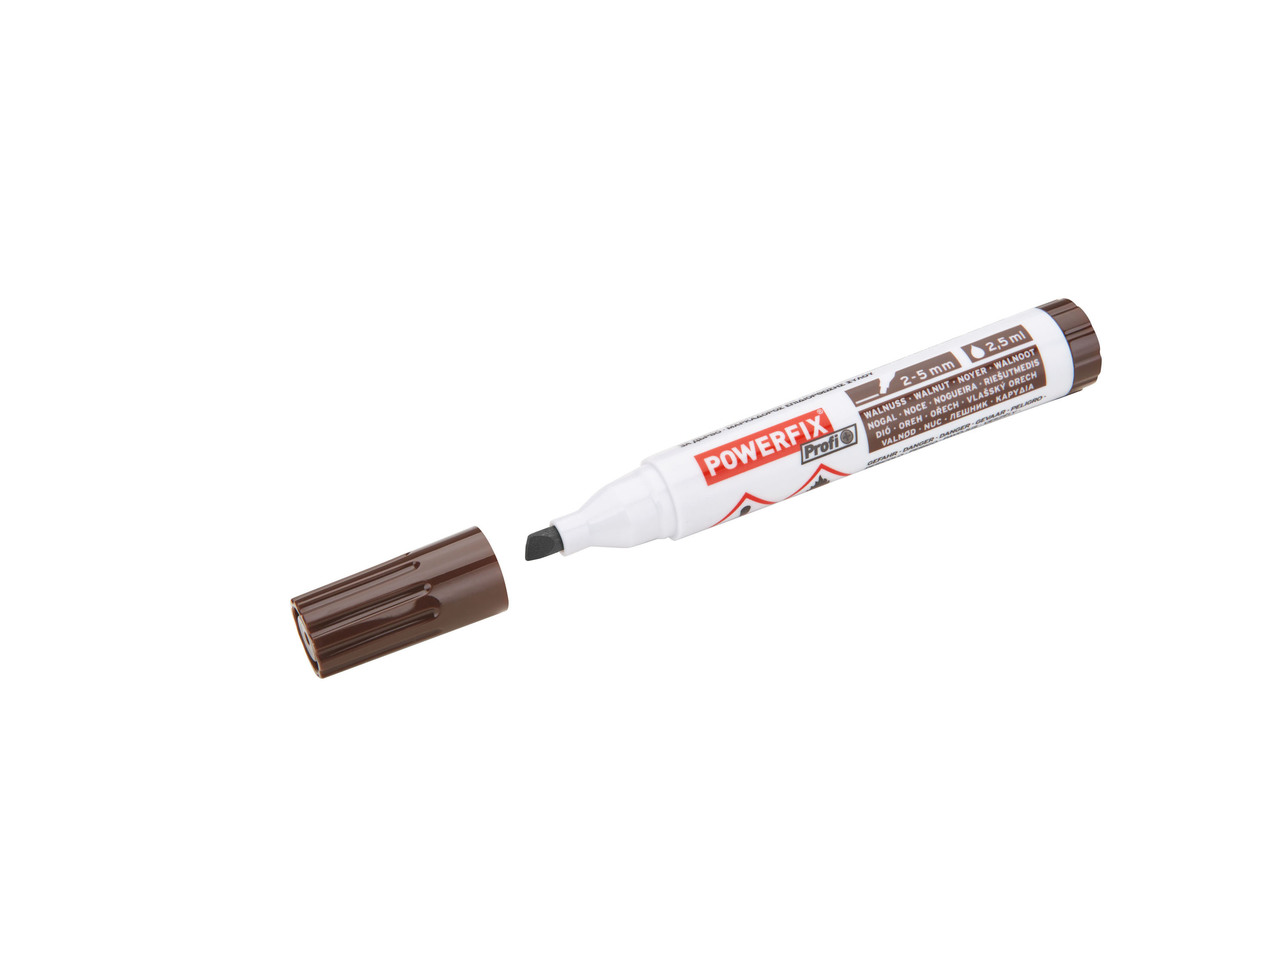 Grout Pen or Wood Touch-Up Pen